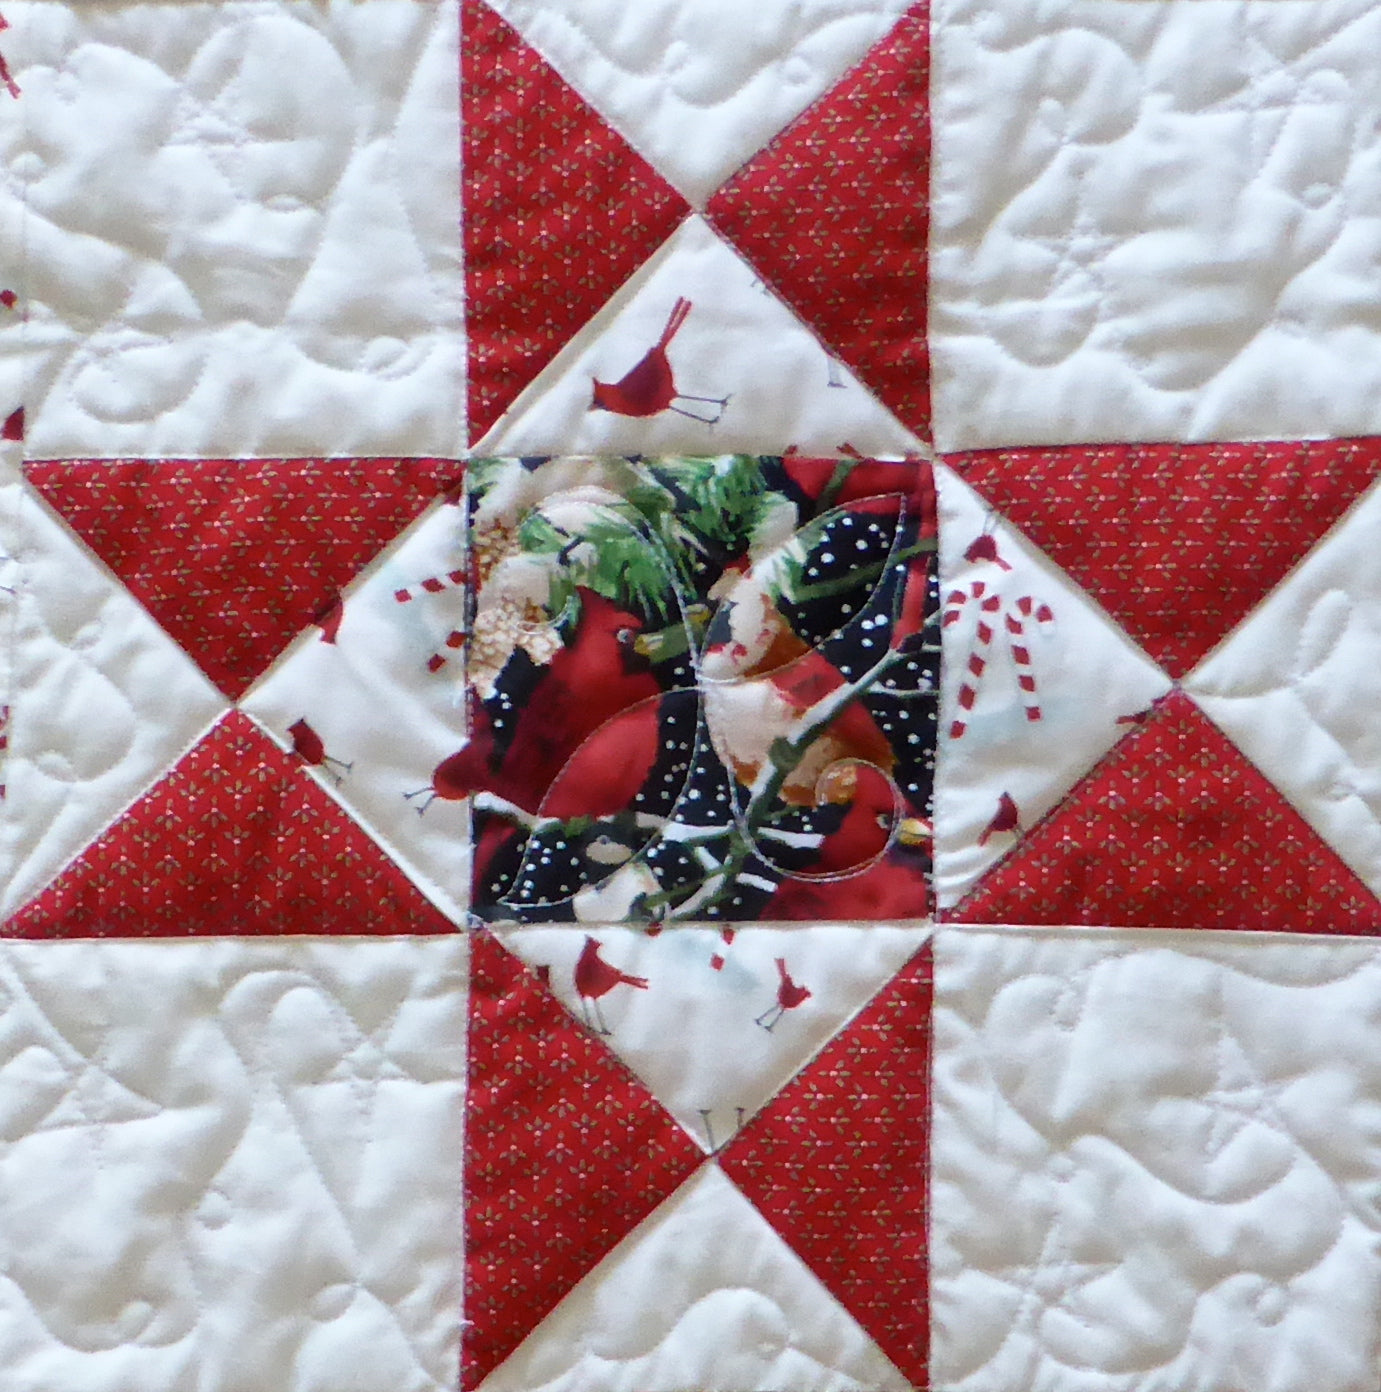 Ohio Star block pattern for Christmas quilt by Anita Eaton